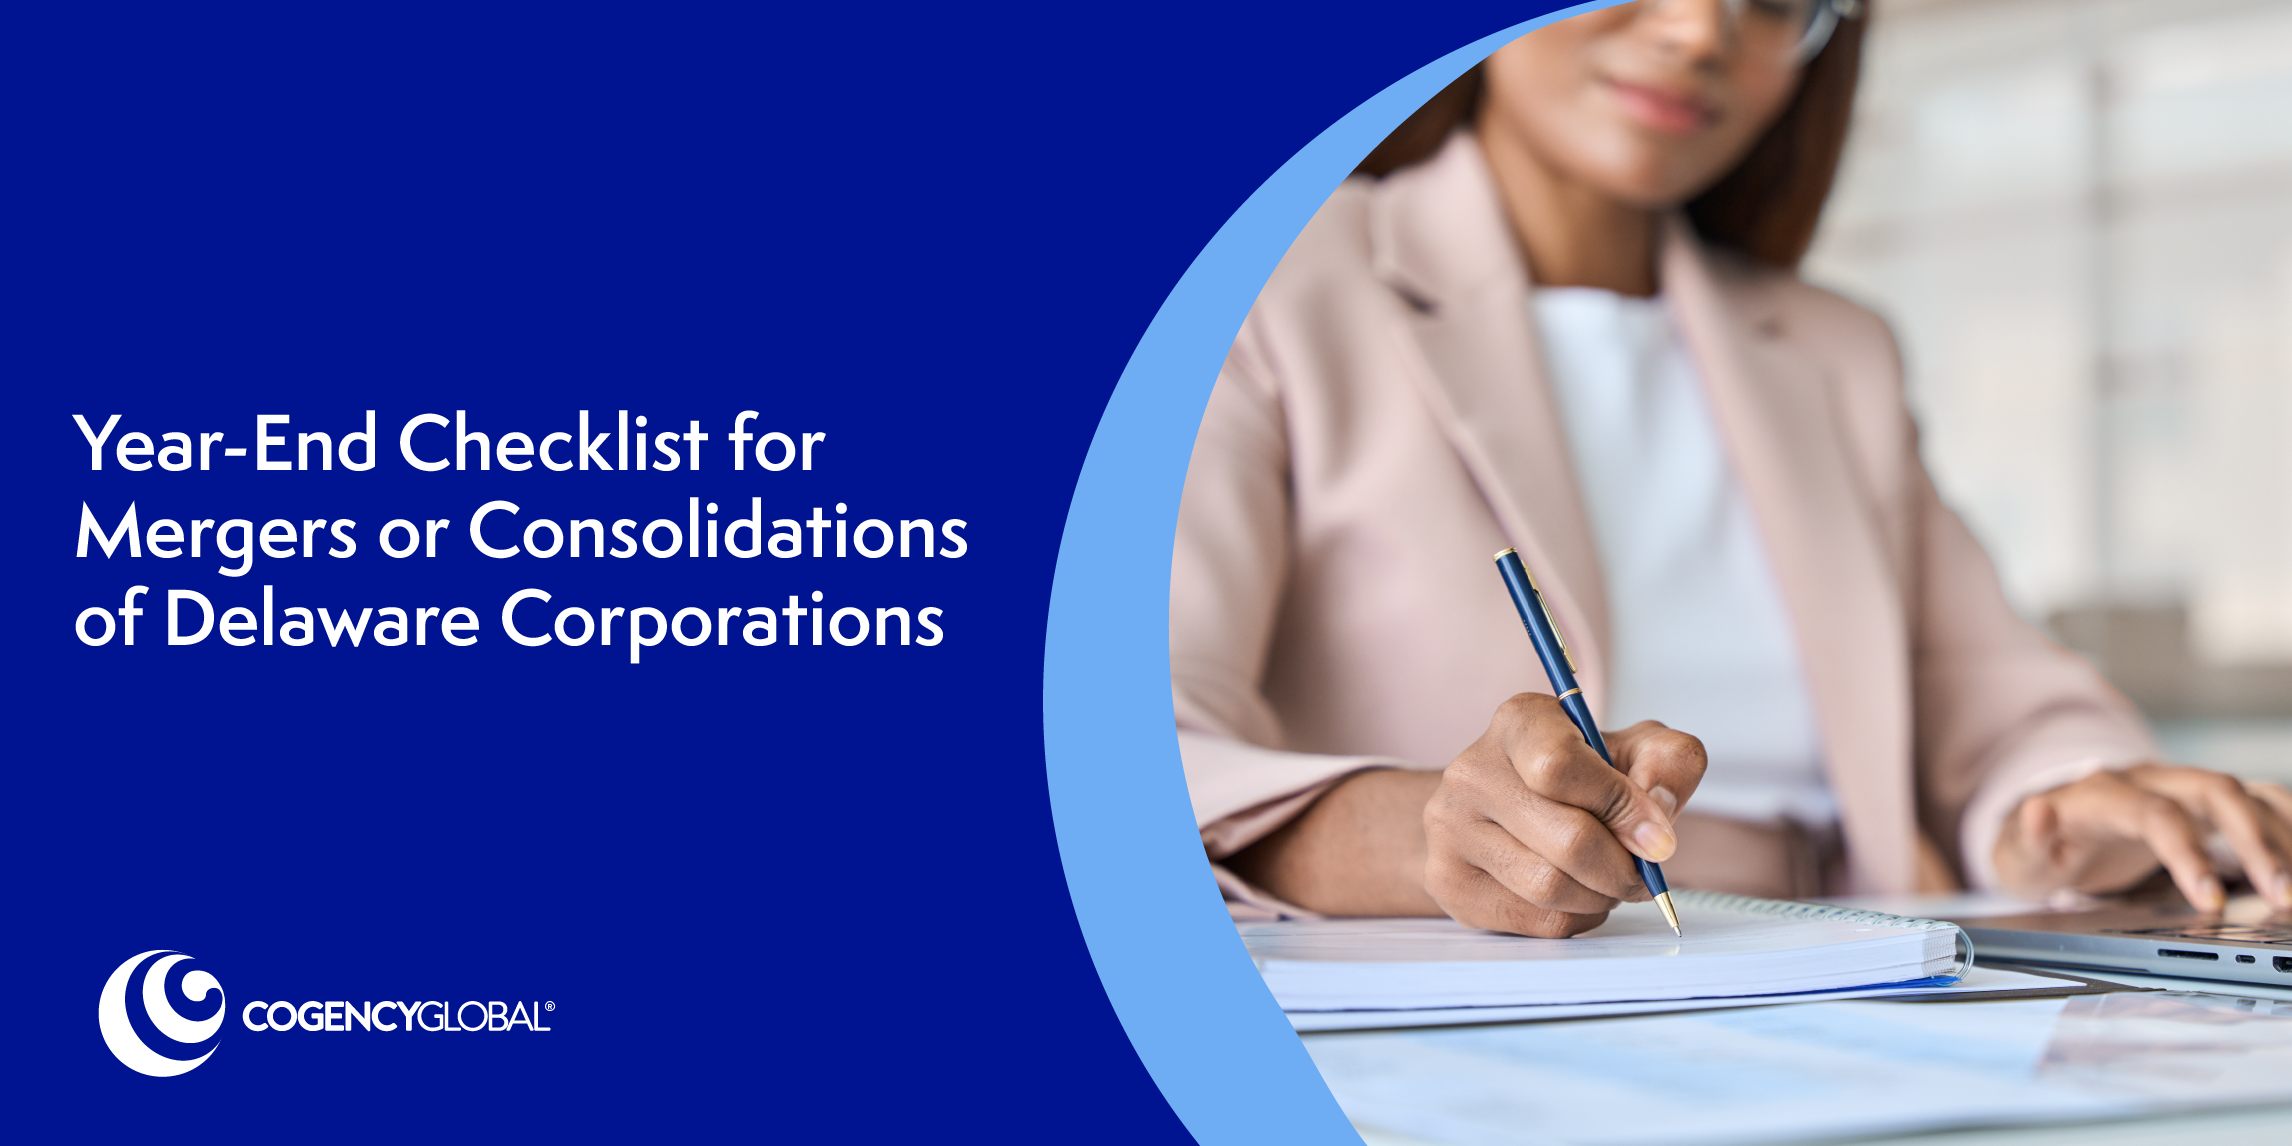 Year-End Checklist for Mergers or Consolidations of Delaware Corporations